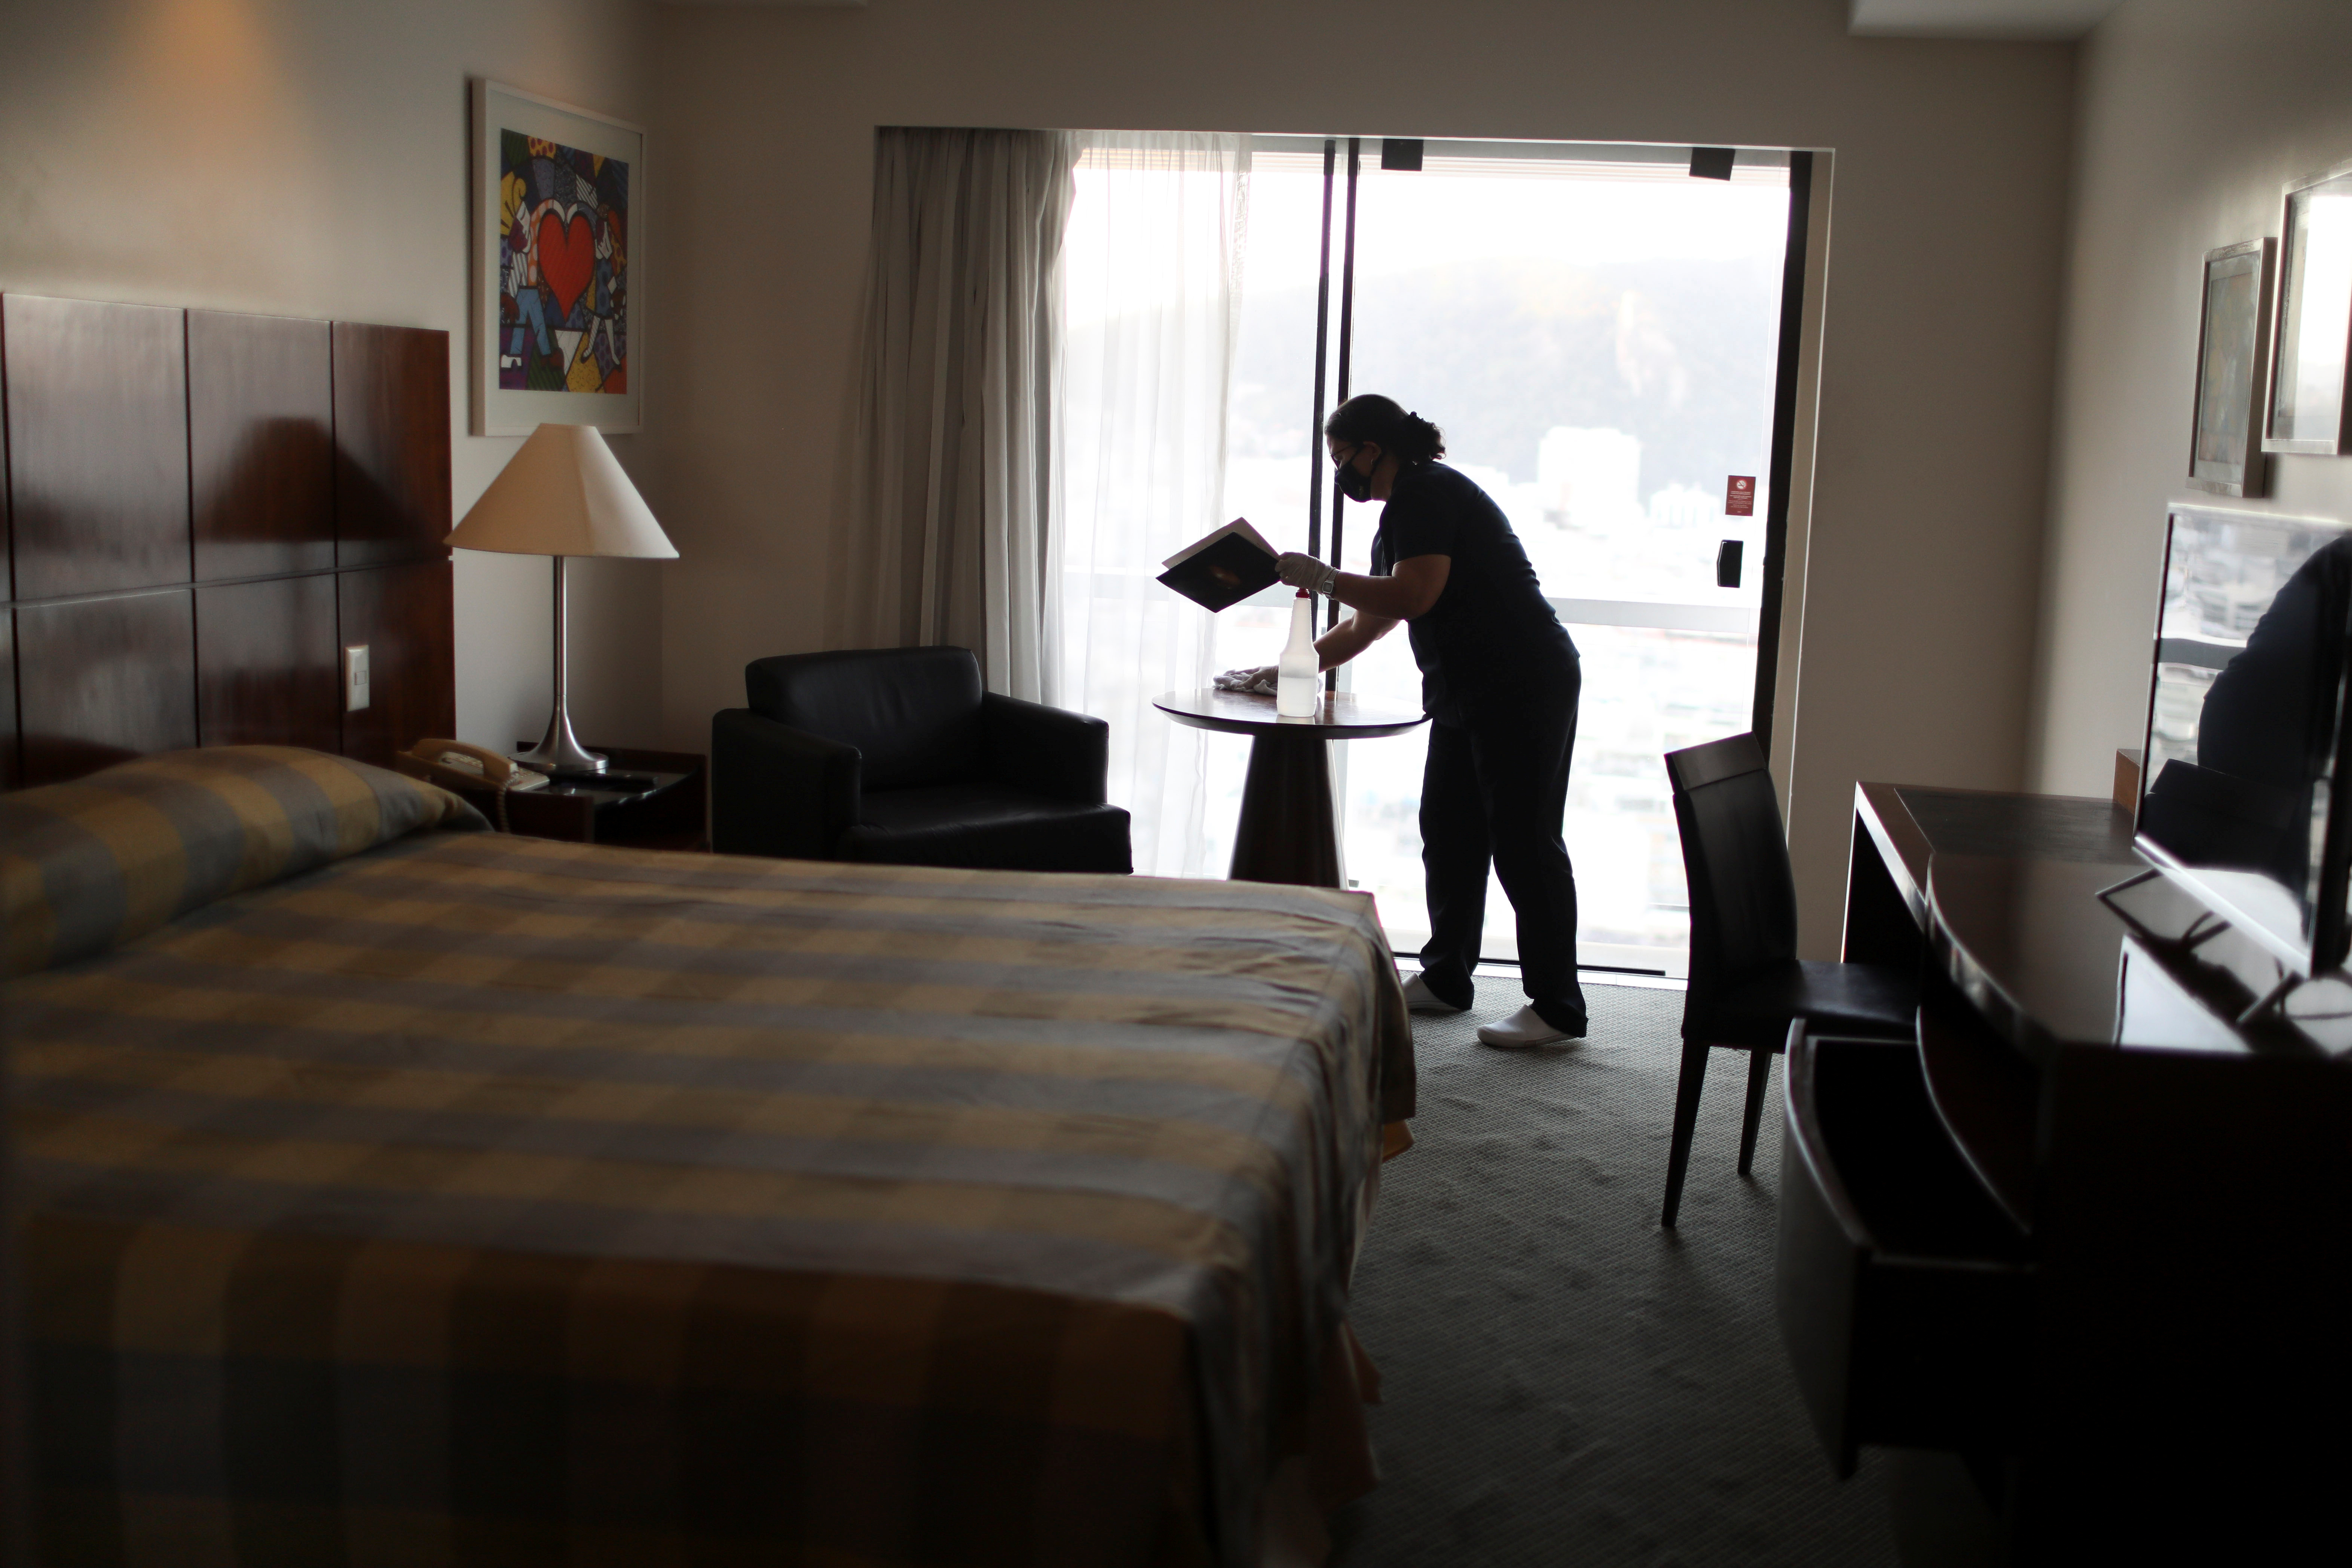 A hotel worker cleans a room in a hotel in Rio de Janeiro